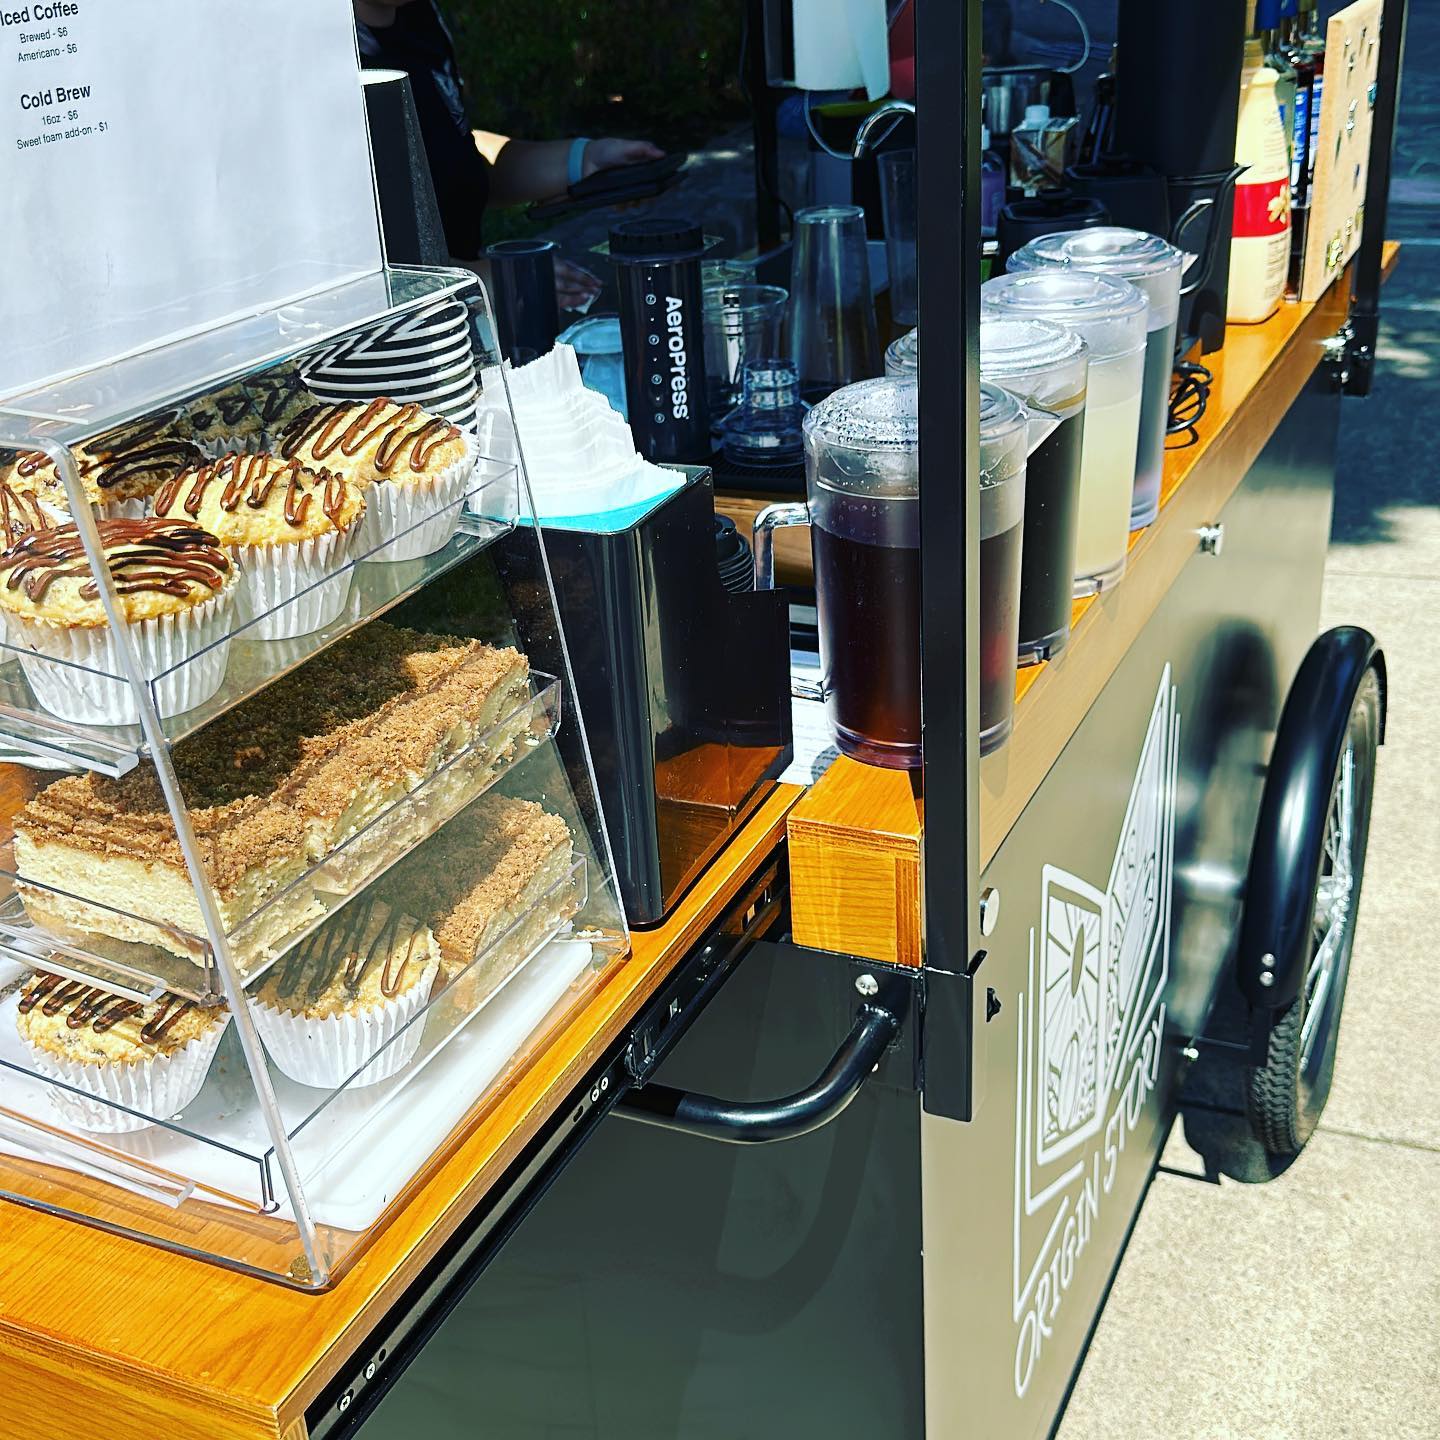 We’ve been bumpin’ all day and serving amazing @yesplzdotcoffee coffee and our home-made goodies and we’re about out of battery for hot coffee. We’ll keep doing pastries and cold brew until 3!